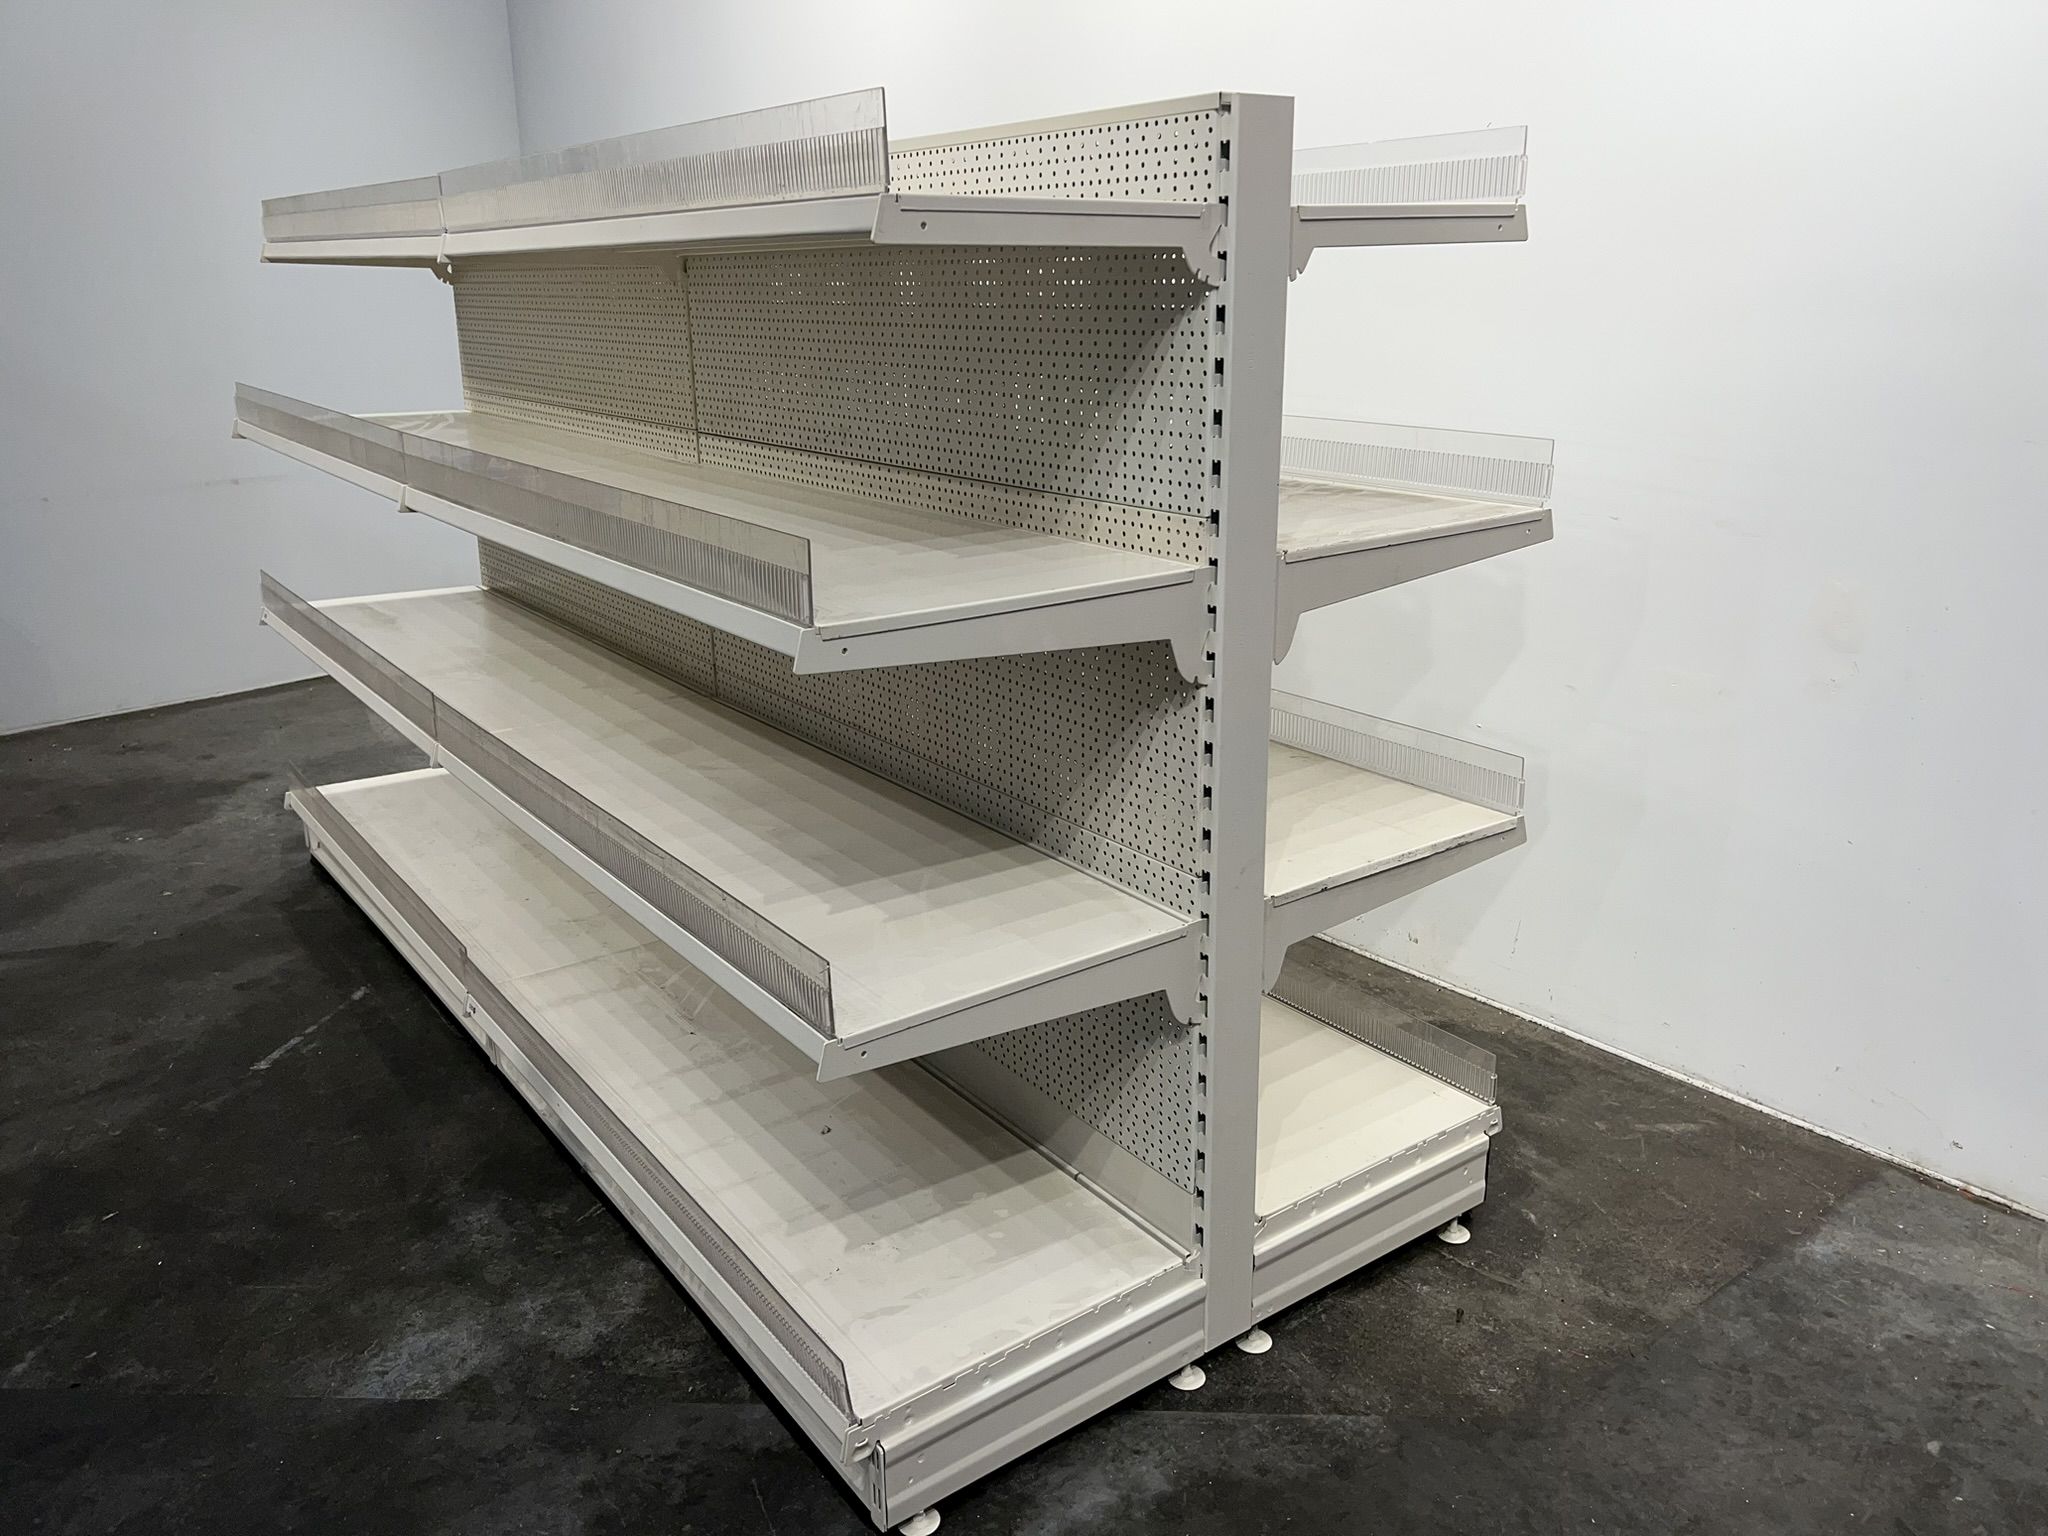 Shelving system / wholesale market  shelving / light heavy duty shelf, Tego, suitable for appropx. 595 m²  of sales area